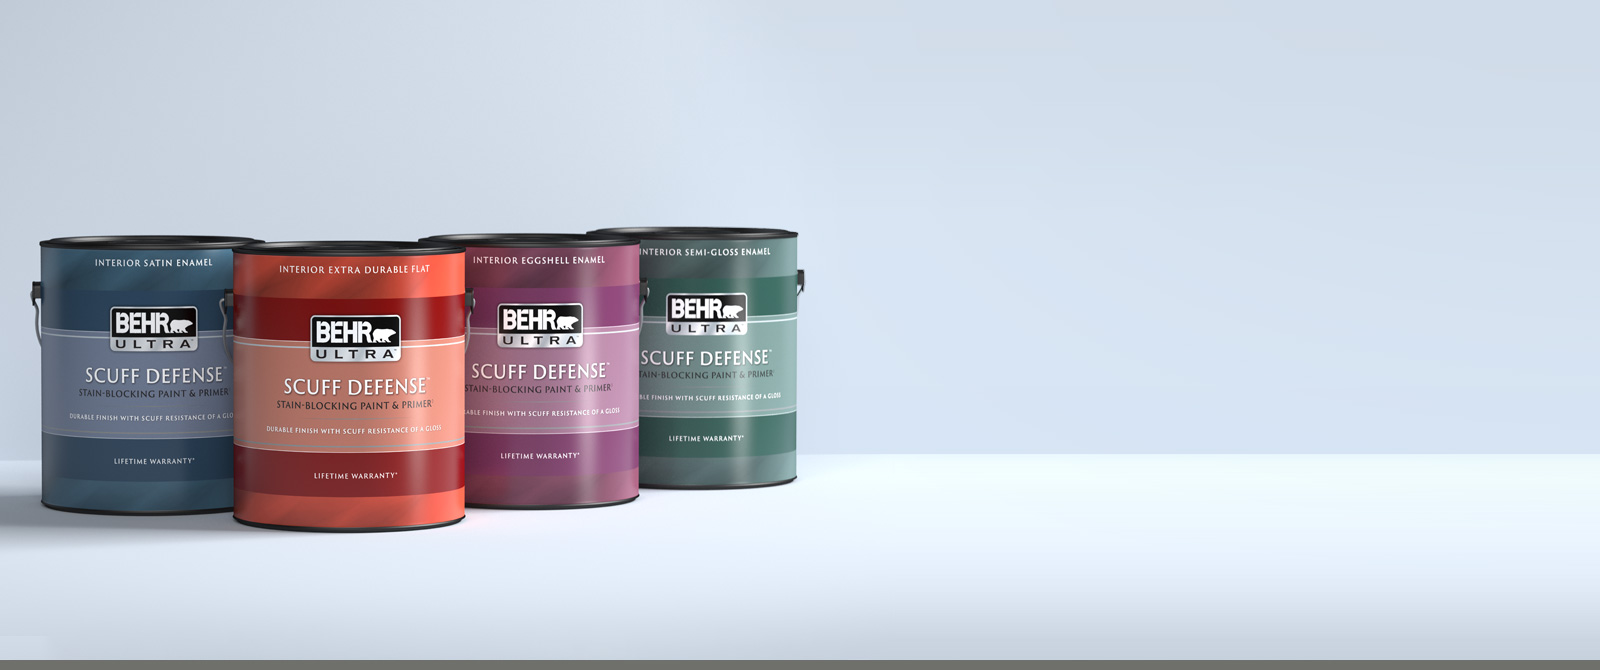 Large Image of a 1 gallon can of BEHR ULTRA SCUFF DEFENSE on a gray background